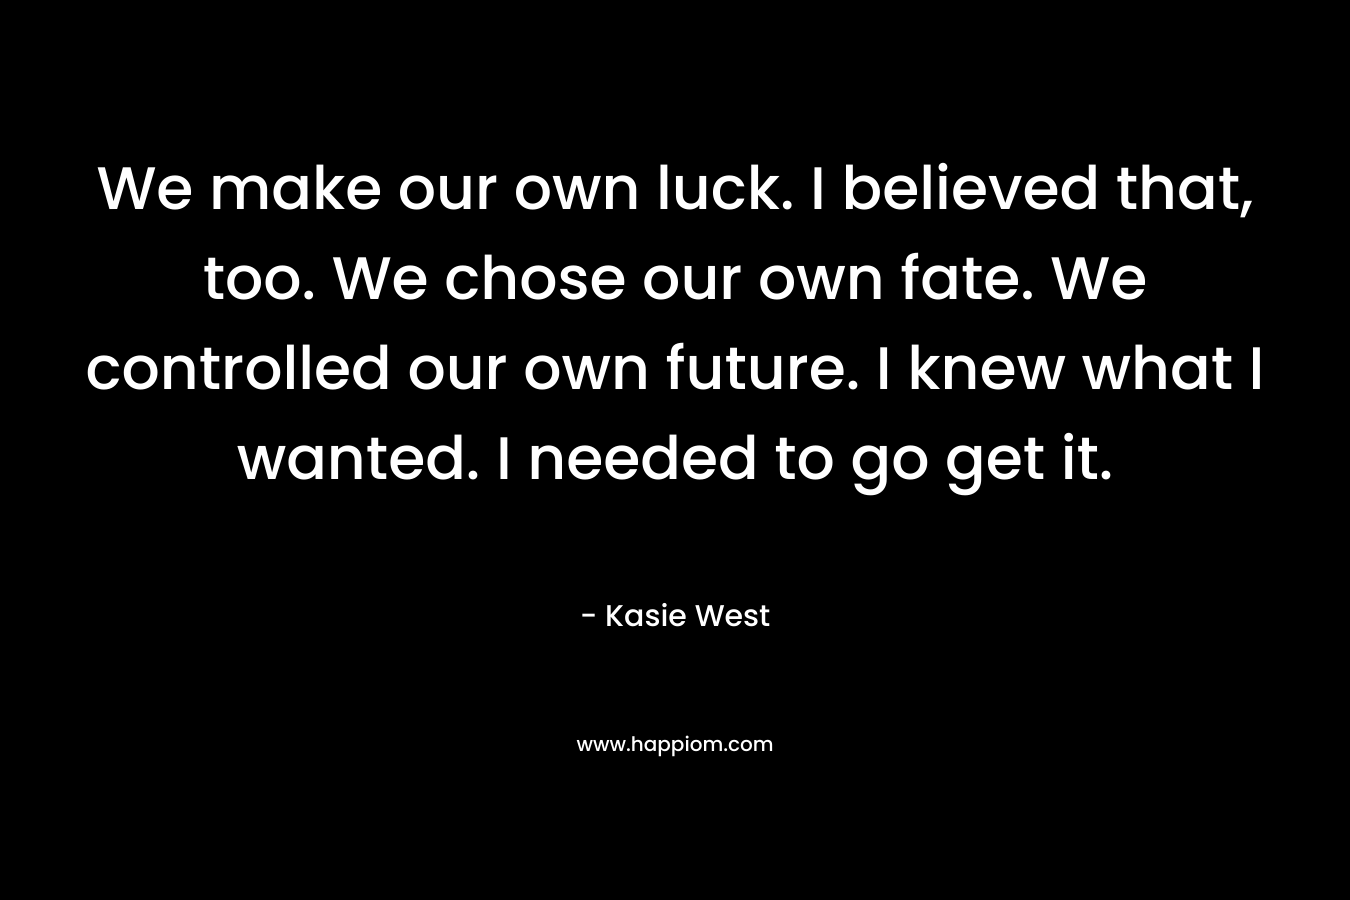 We make our own luck. I believed that, too. We chose our own fate. We controlled our own future. I knew what I wanted. I needed to go get it.